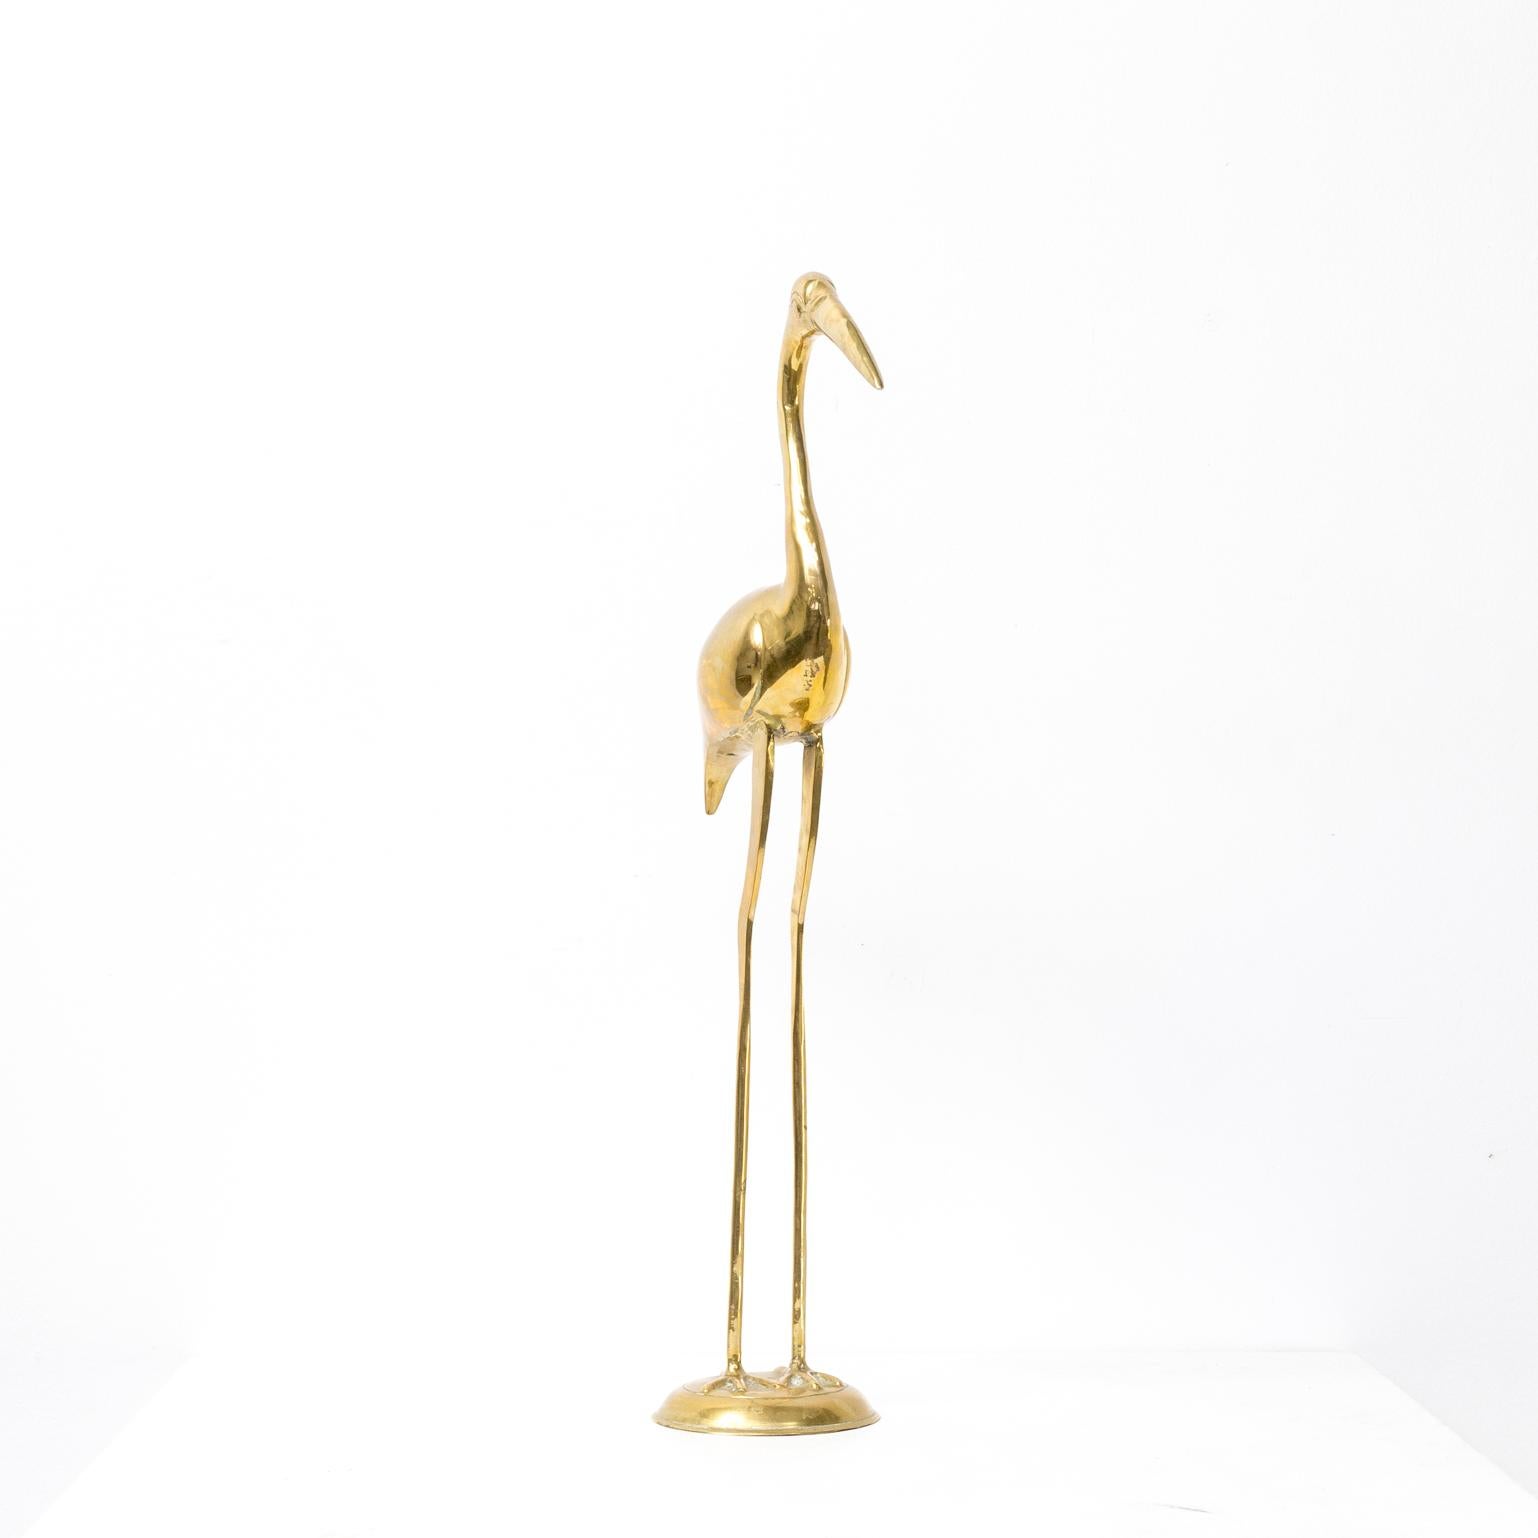 1980s decorative object Brass Heron. Decorative objects make the finishing touch in interiors, this brass heron gives any interior a sophisticated look with its elegant looks. Good condition.